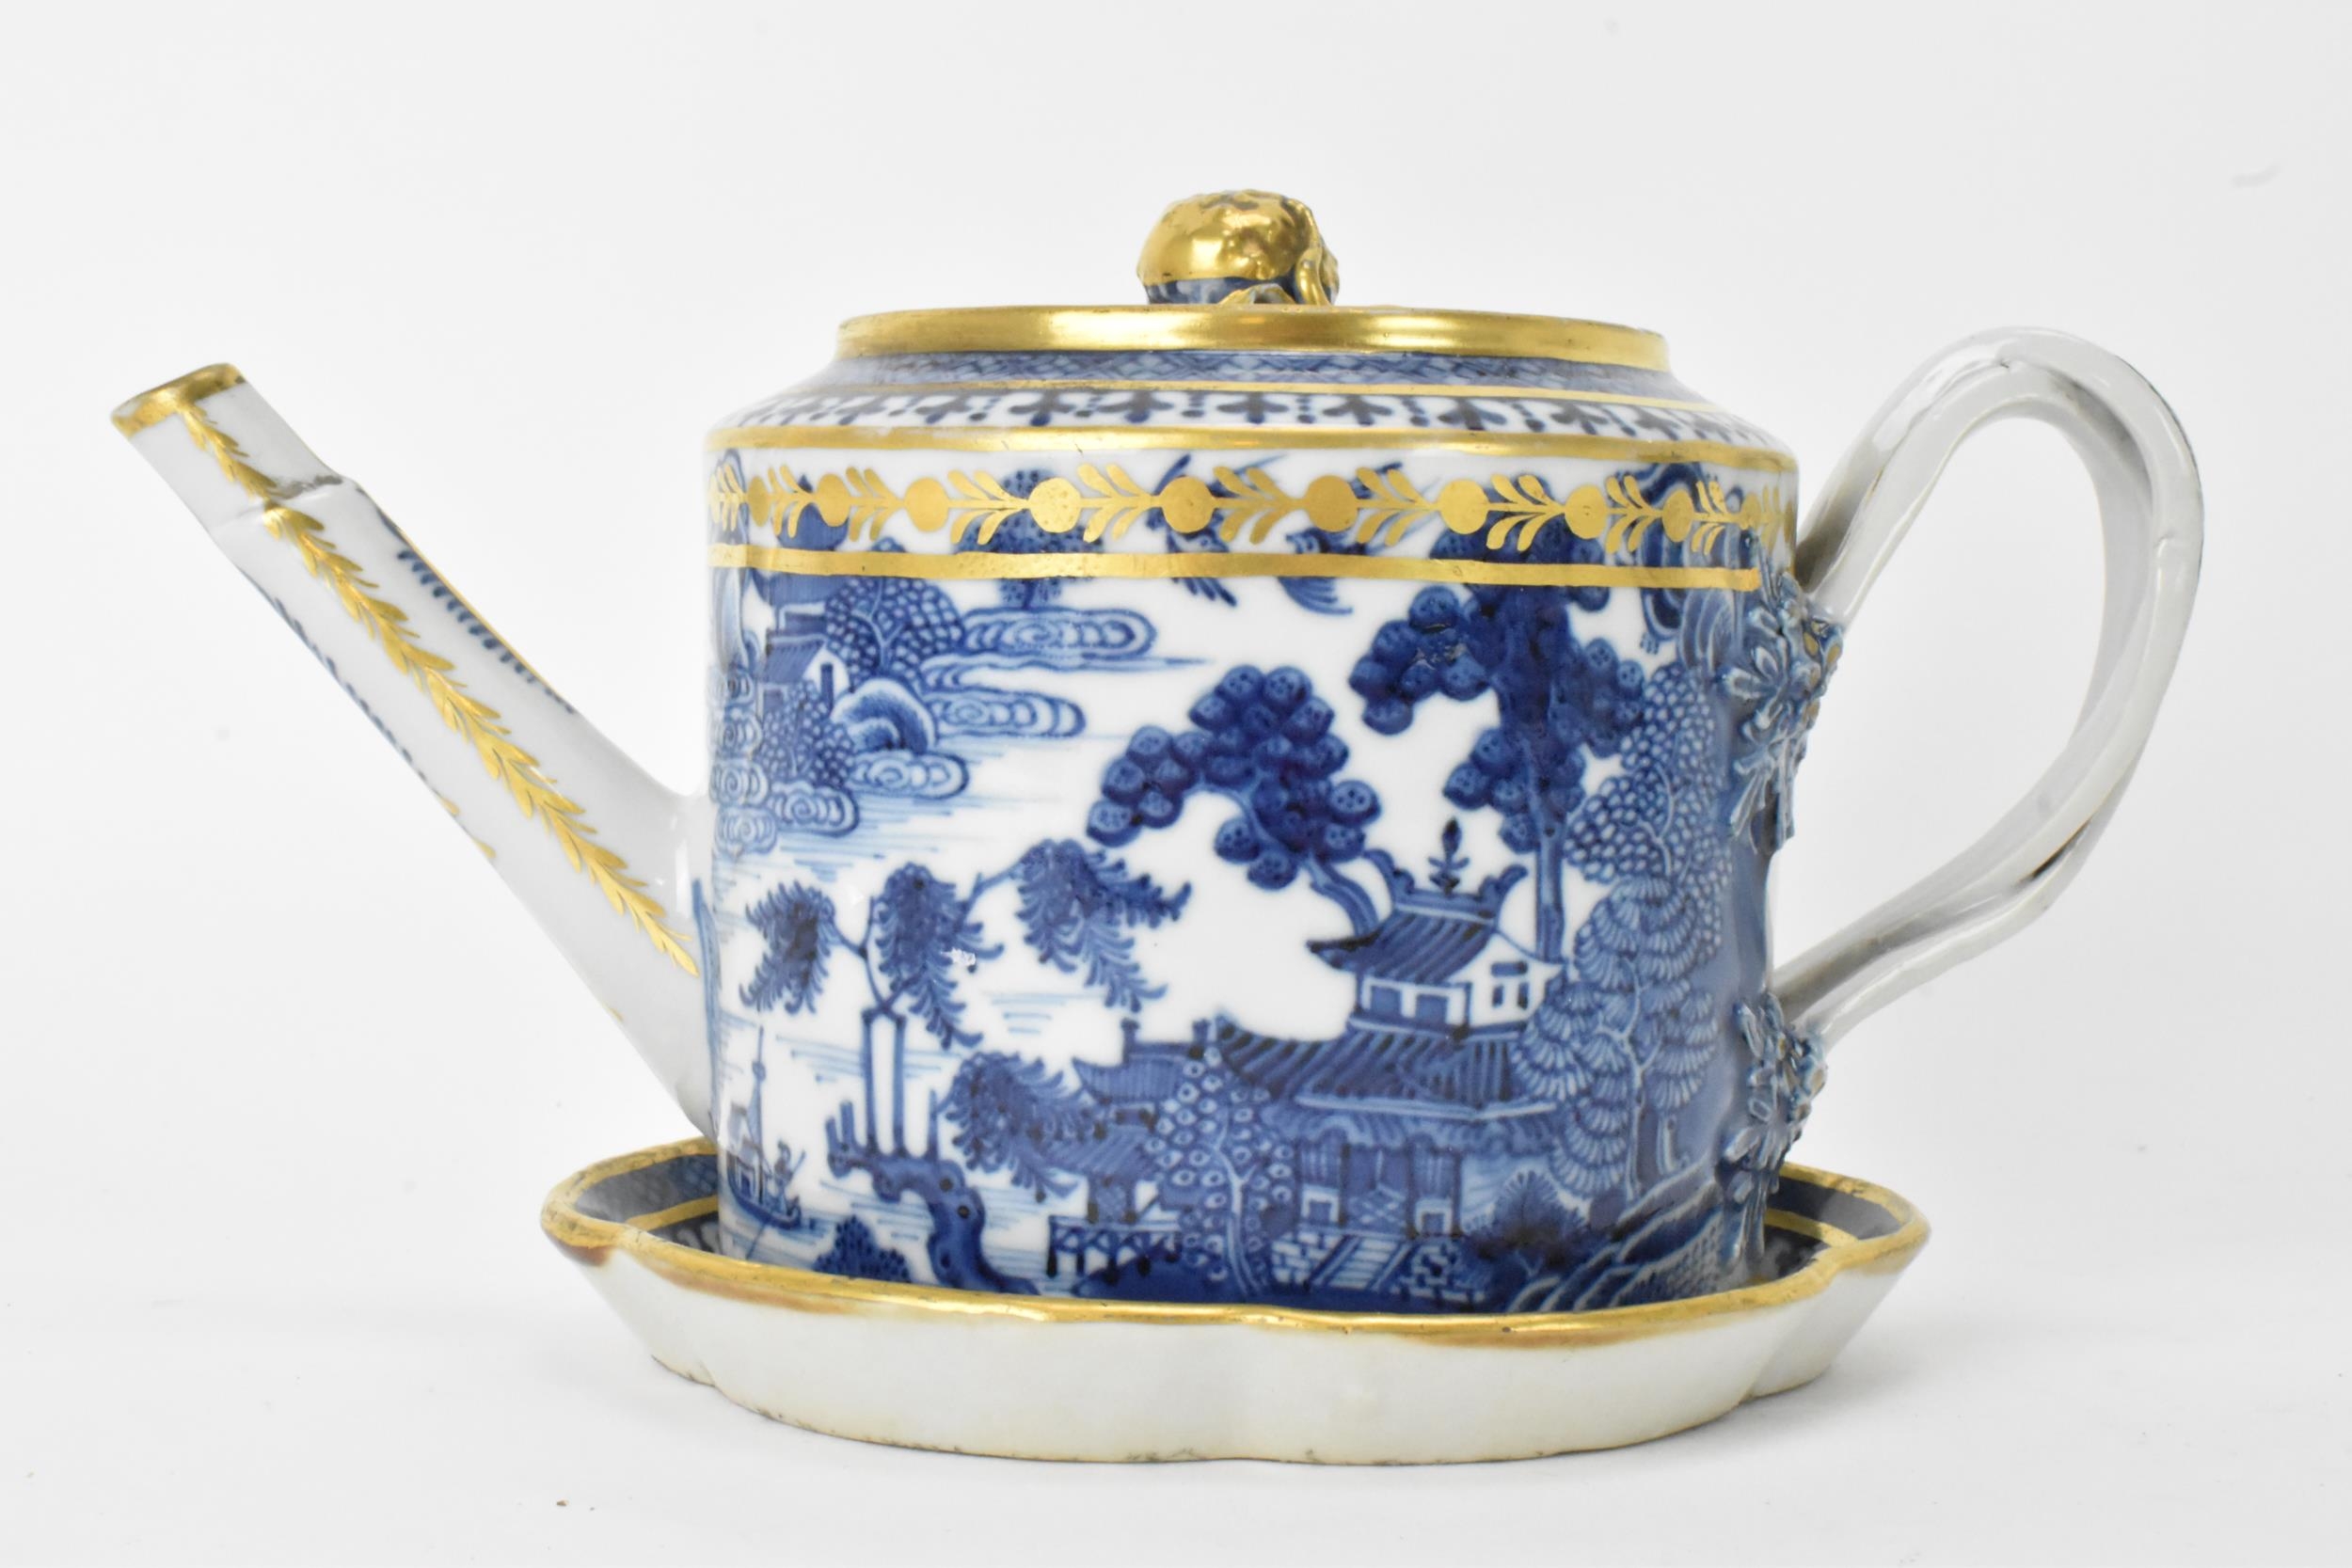 A Chinese export Qing dynasty blue and white teapot and stand, late 18th century, decorated with